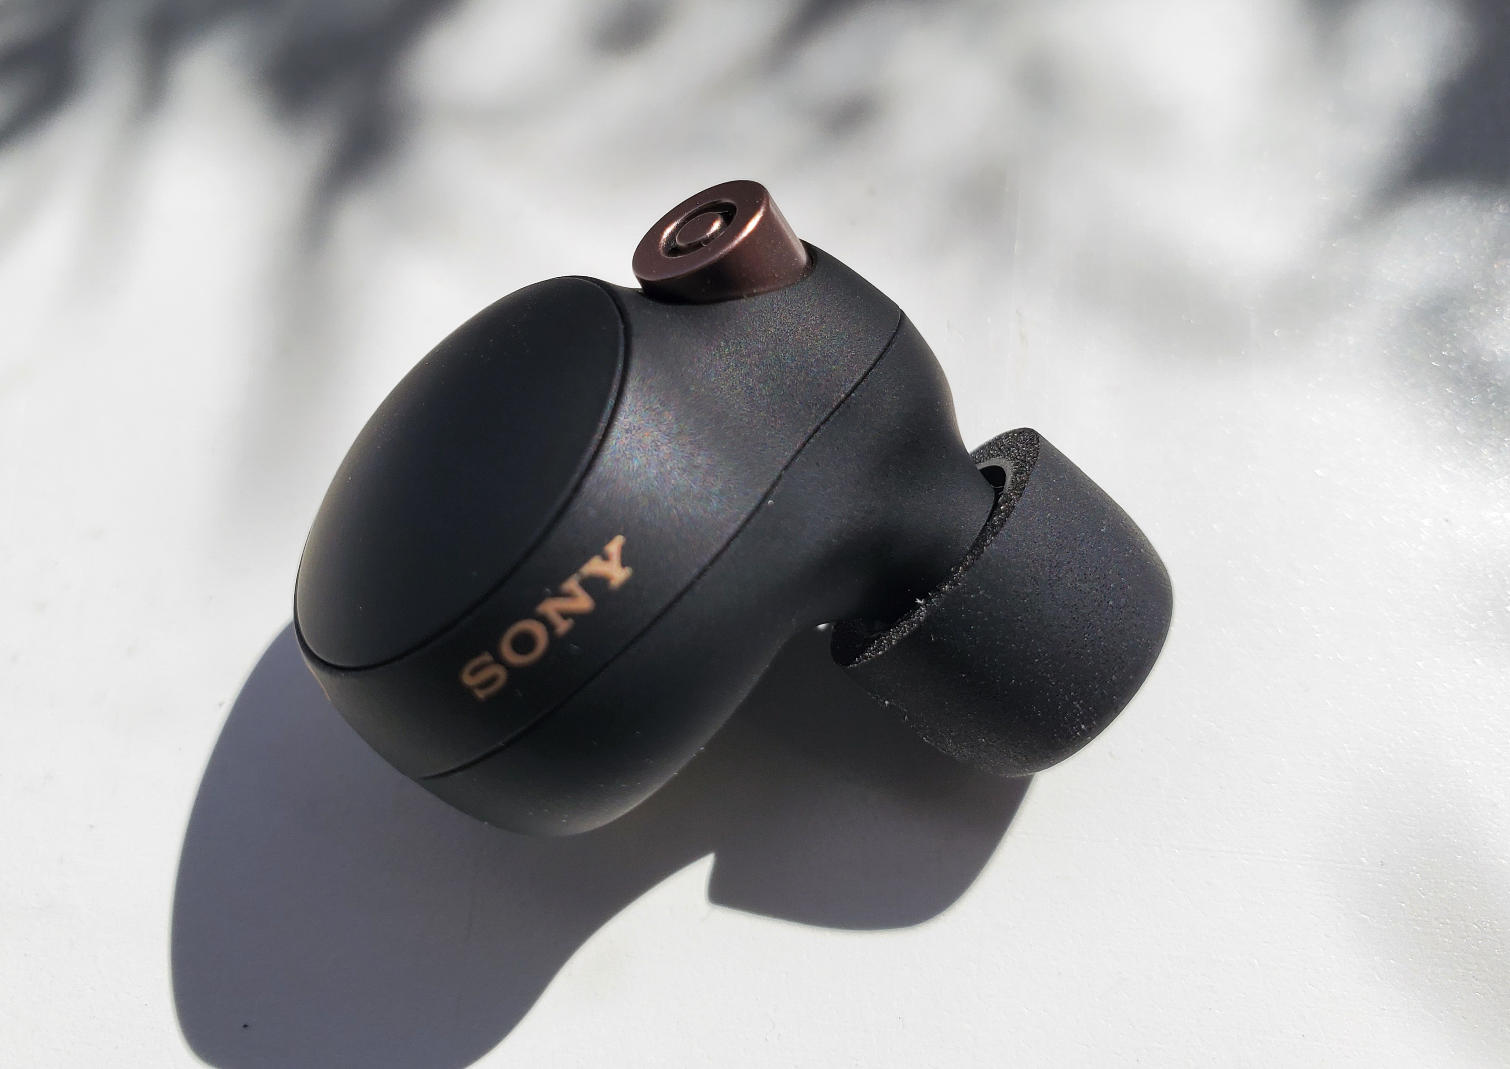 Sony WF-1000XM4 earbuds review: Superb noise cancellation, clear calls, and  long battery life